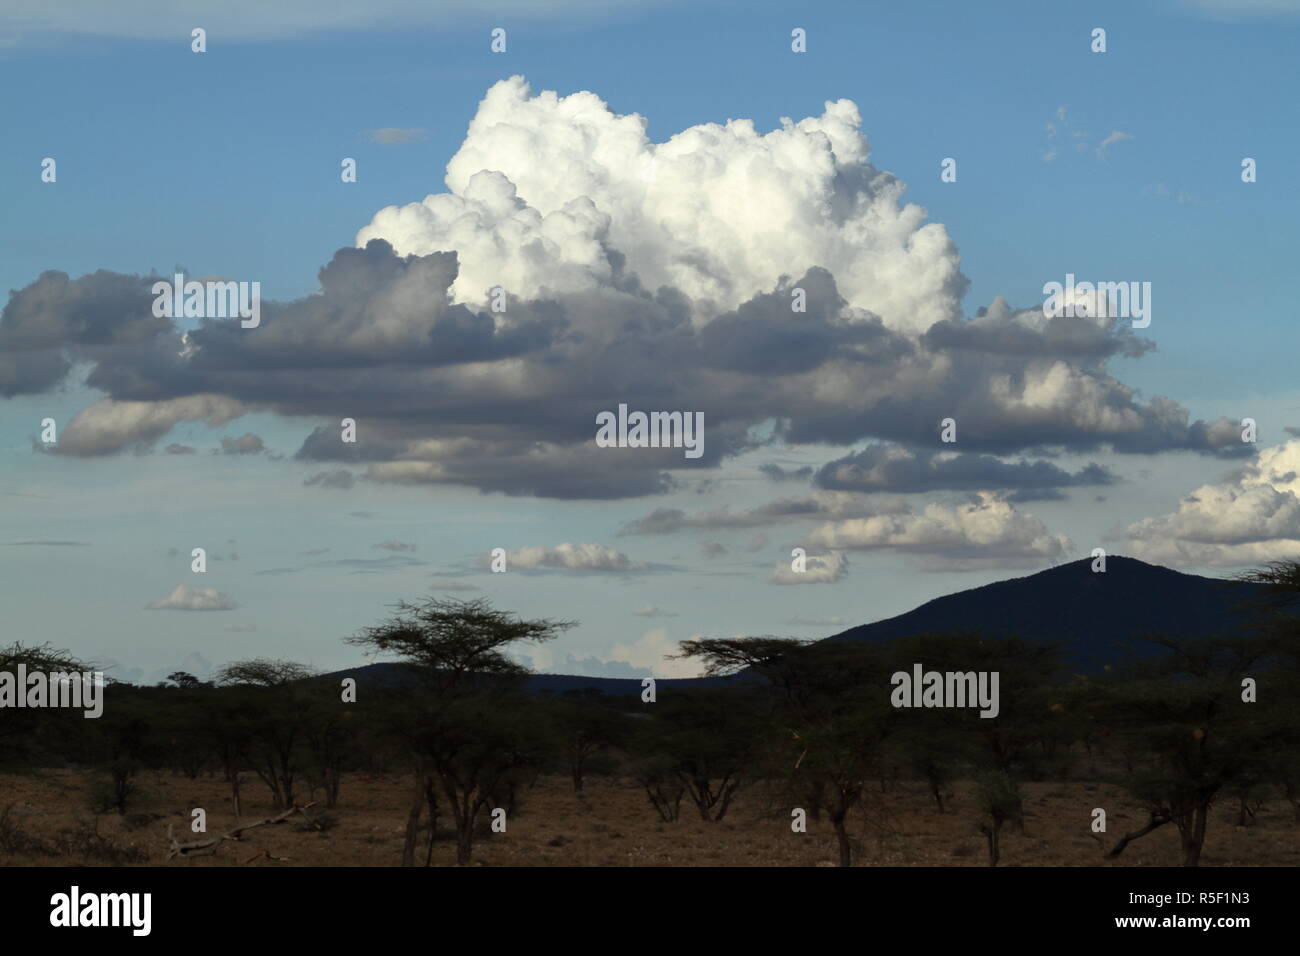 rain and thunderclouds in the sky Stock Photo